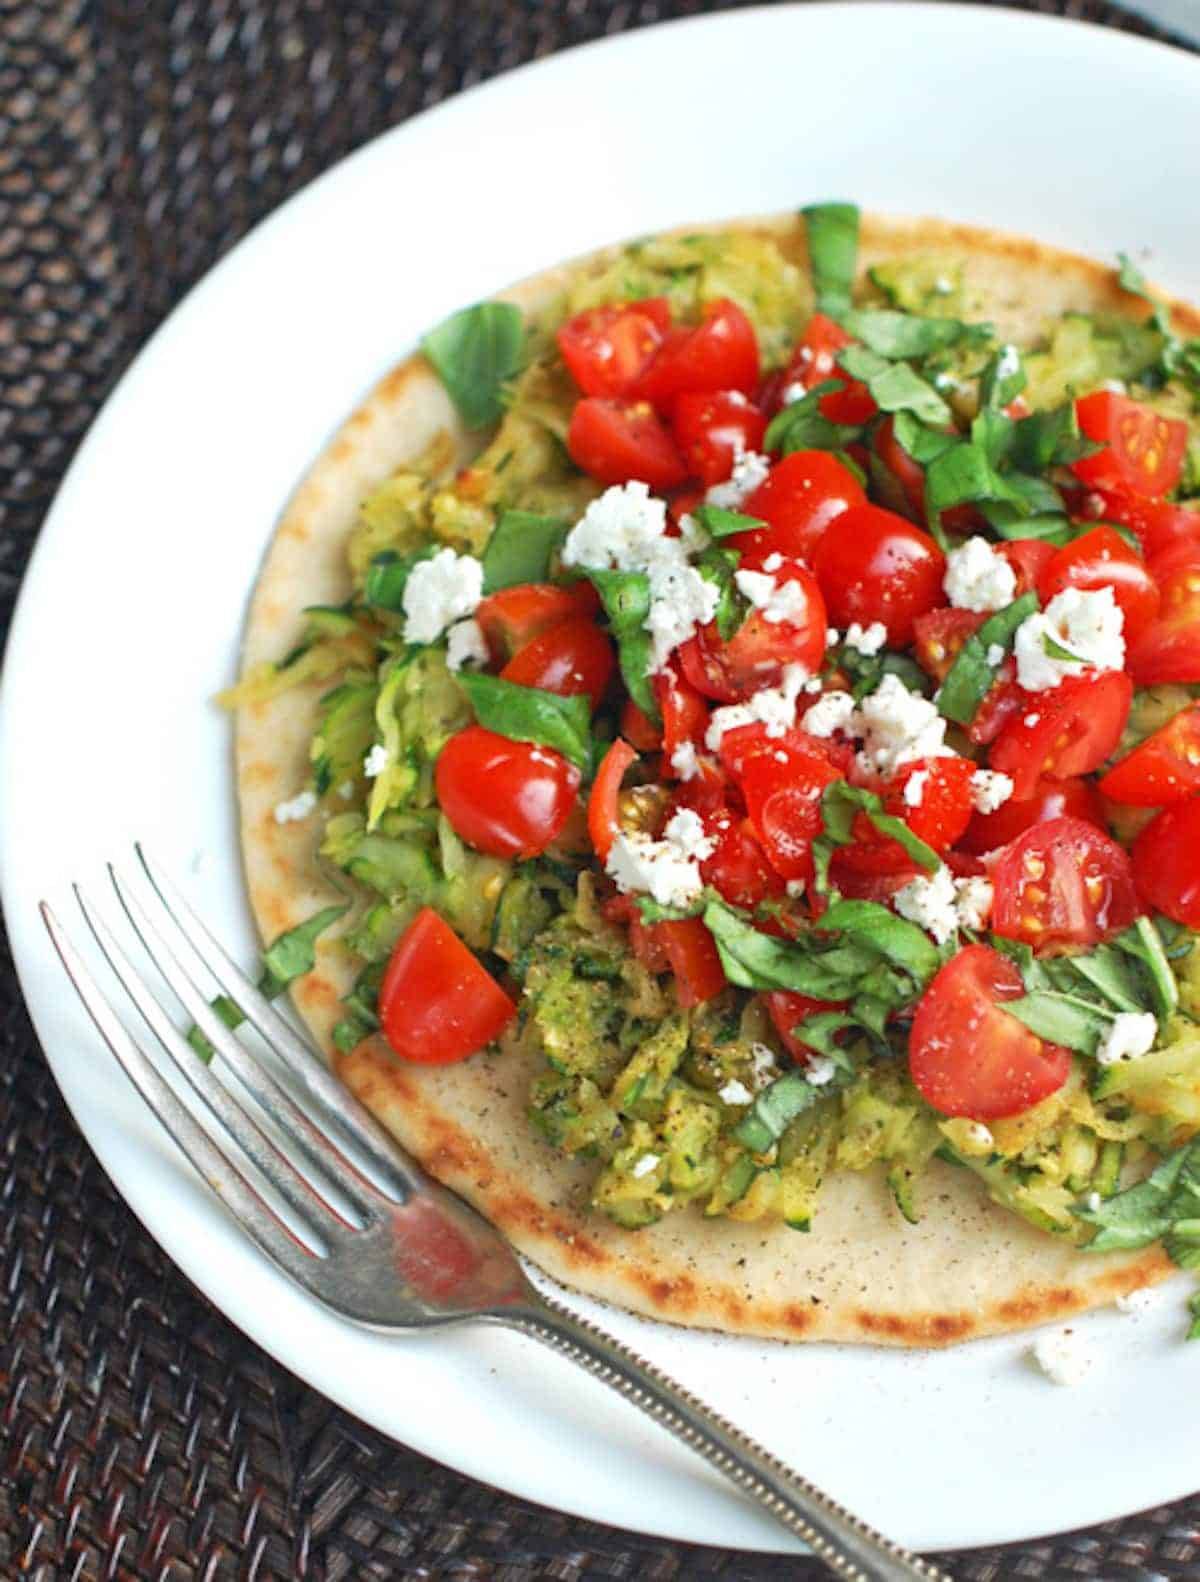 Flatbread pizza with zucchini, cherry tomatoes, and basil on a plate with a fork.